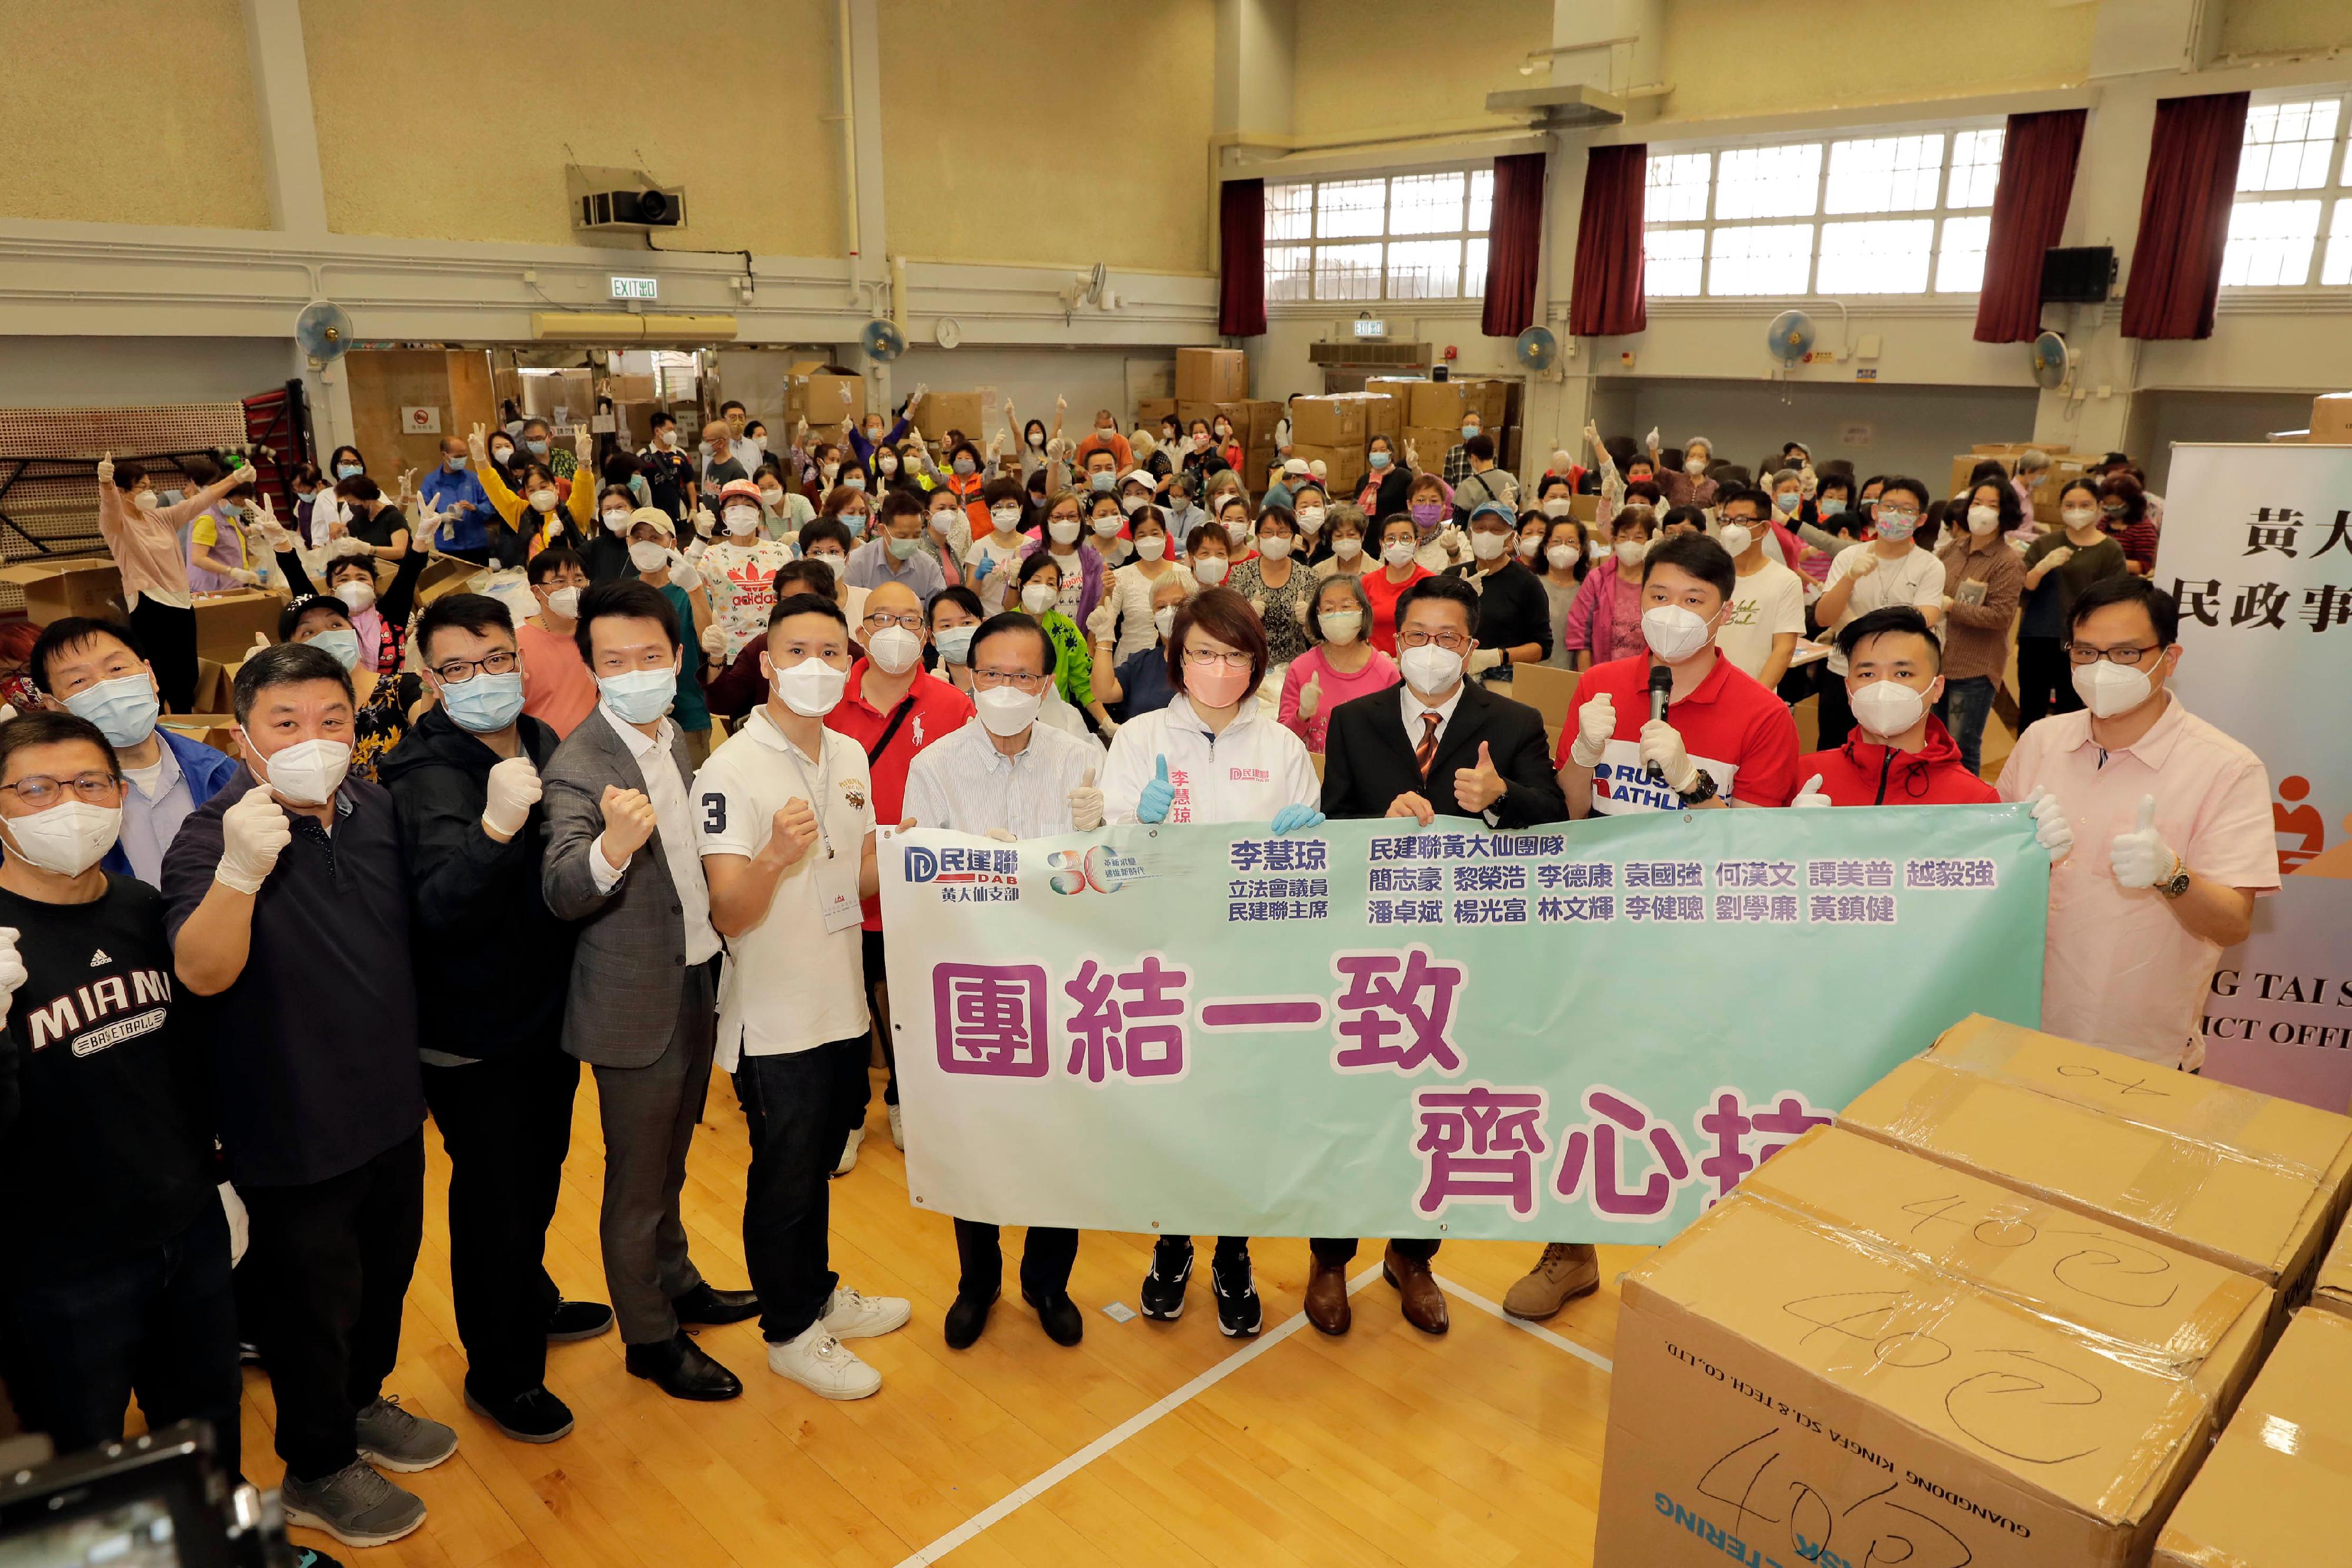 The Acting Secretary for Home Affairs, Mr Jack Chan, participated in the packaging work of anti-epidemic service bags at the packaging centre in the Fung Tak Estate Community Centre in Wong Tai Sin today (March 31). Photo shows Mr Jack Chan (front row, fourth right), with volunteers at the packaging centre.

 


